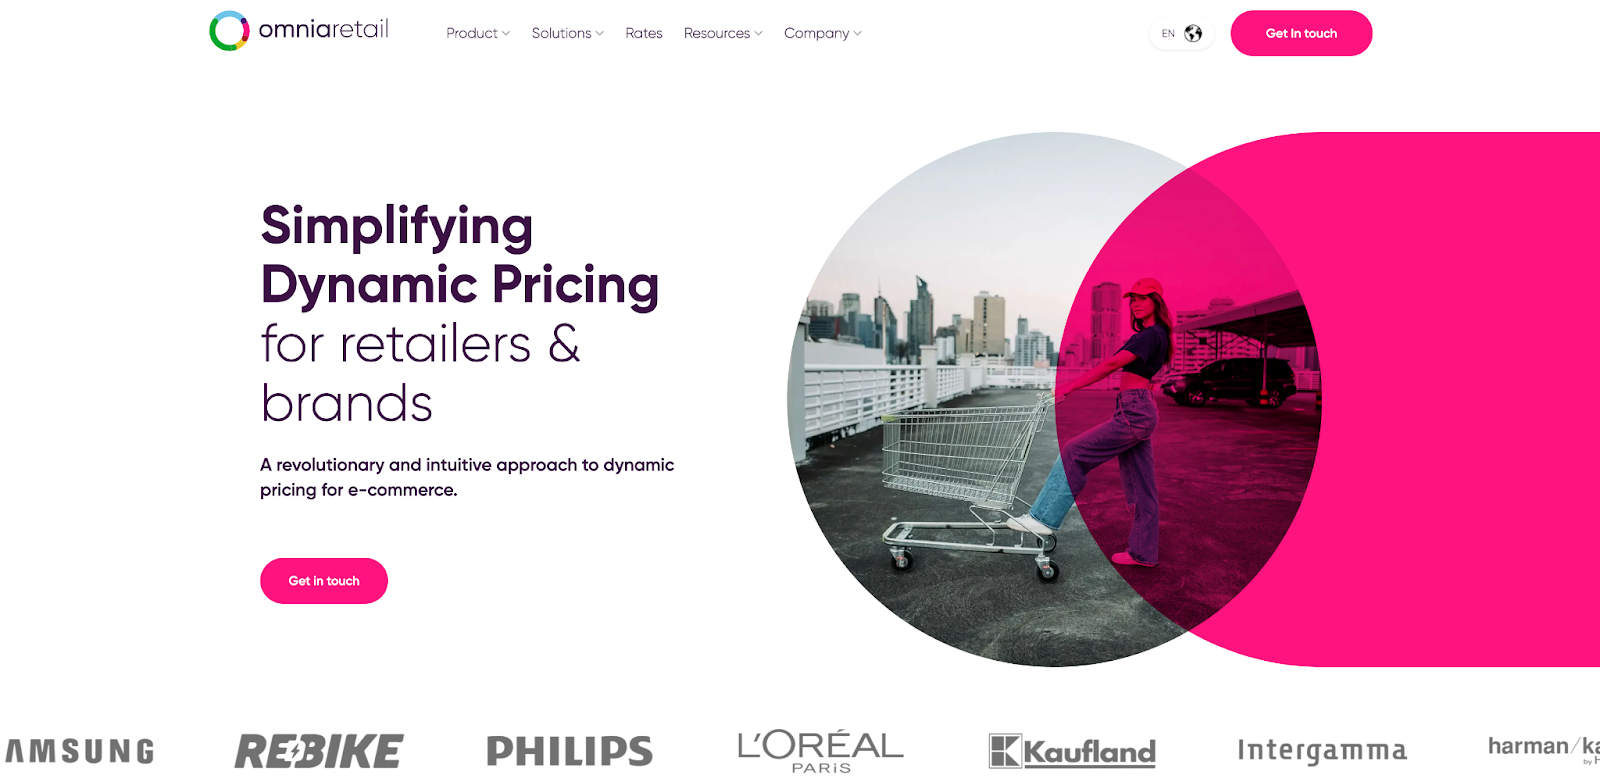 Omnia’s homepage with the clients they serve including Philips, Samsung and L’Oreal Paris.